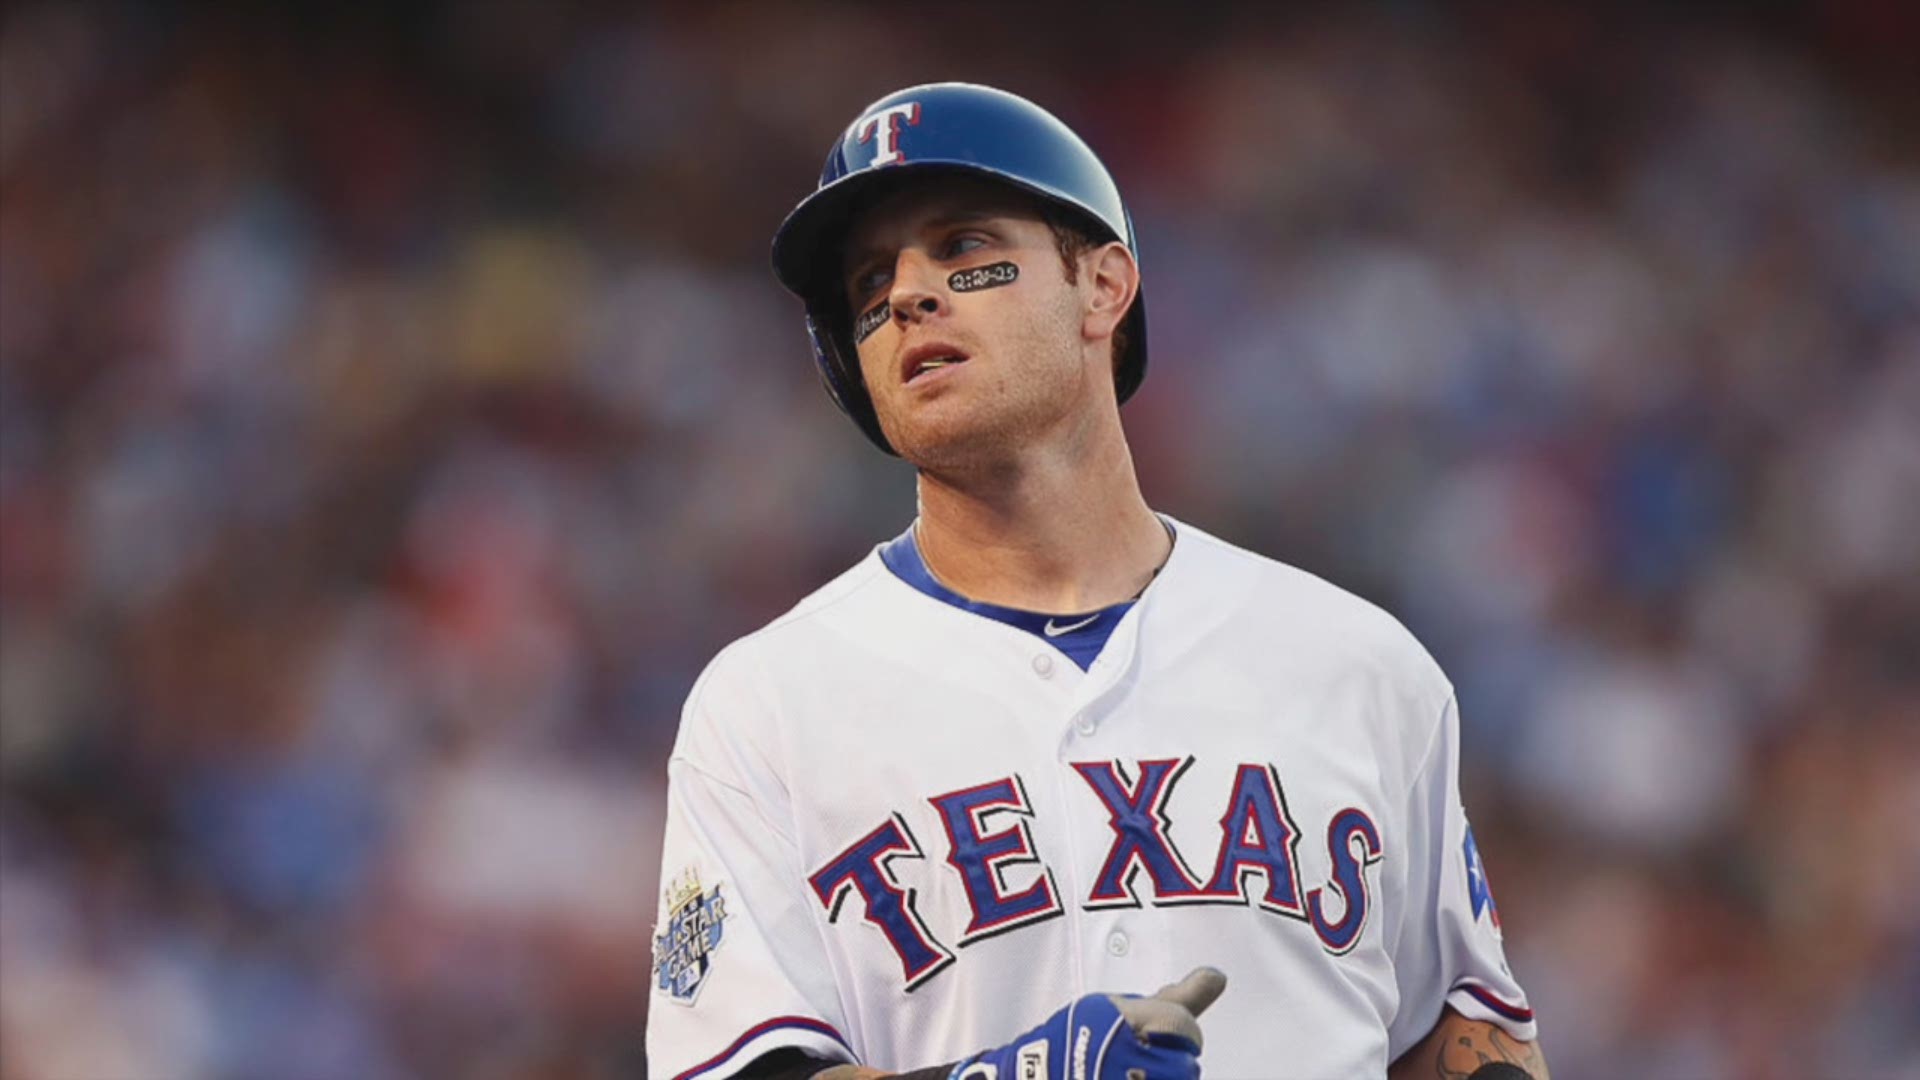 Back with Texas, a last chance in MLB for Josh Hamilton?